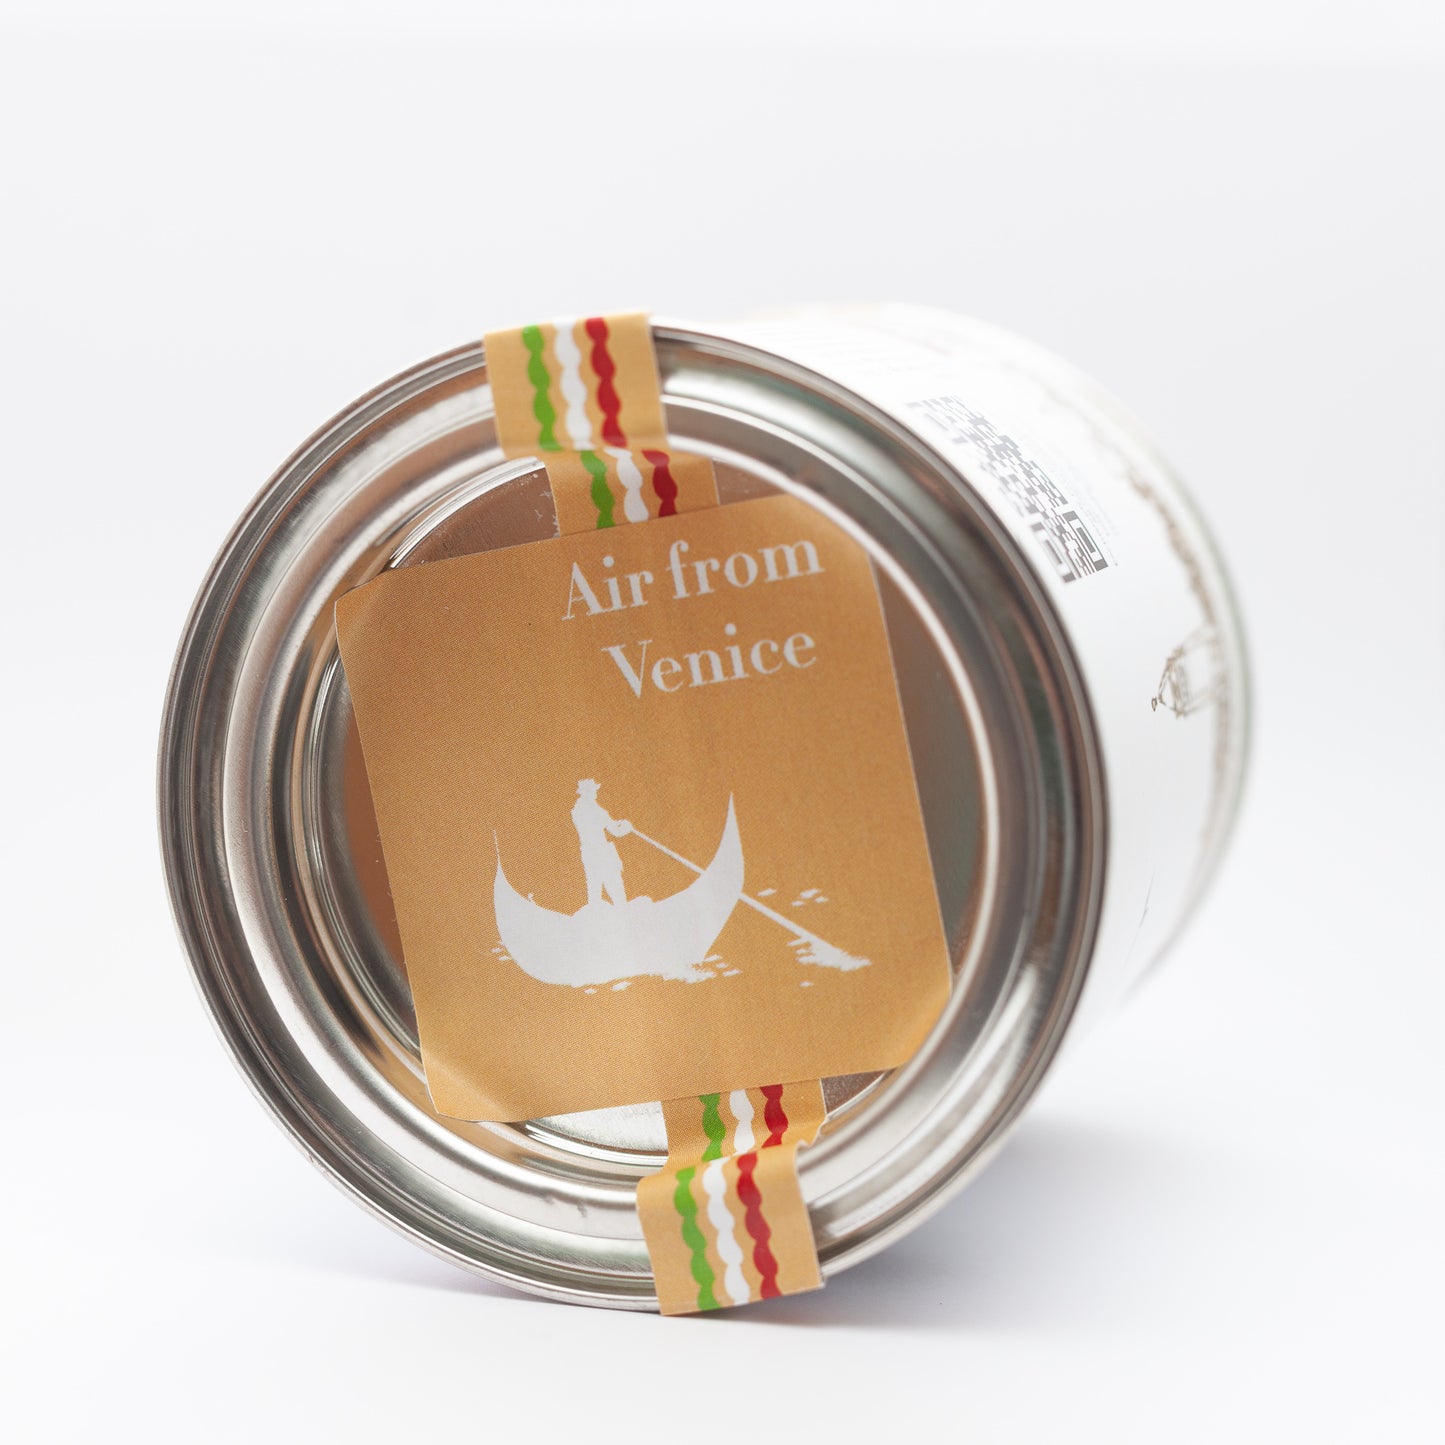 Venice Gift Ideas – Canned Air 